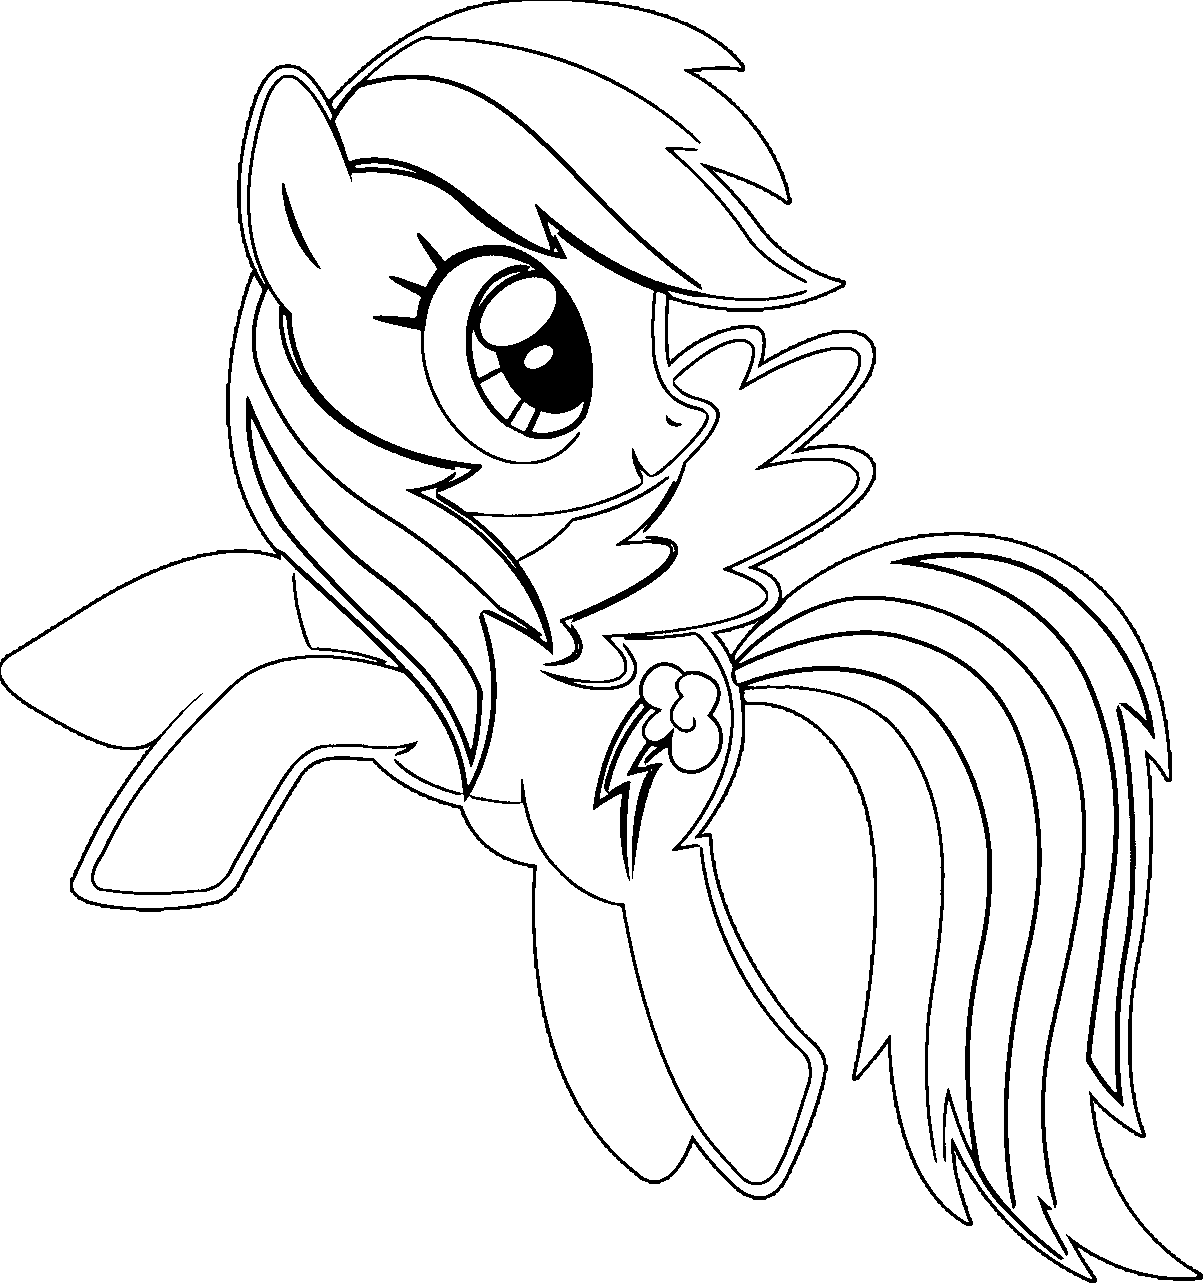 rainbow dash pictures to color coloring pages for rainbow dash coloring home to pictures color dash rainbow 